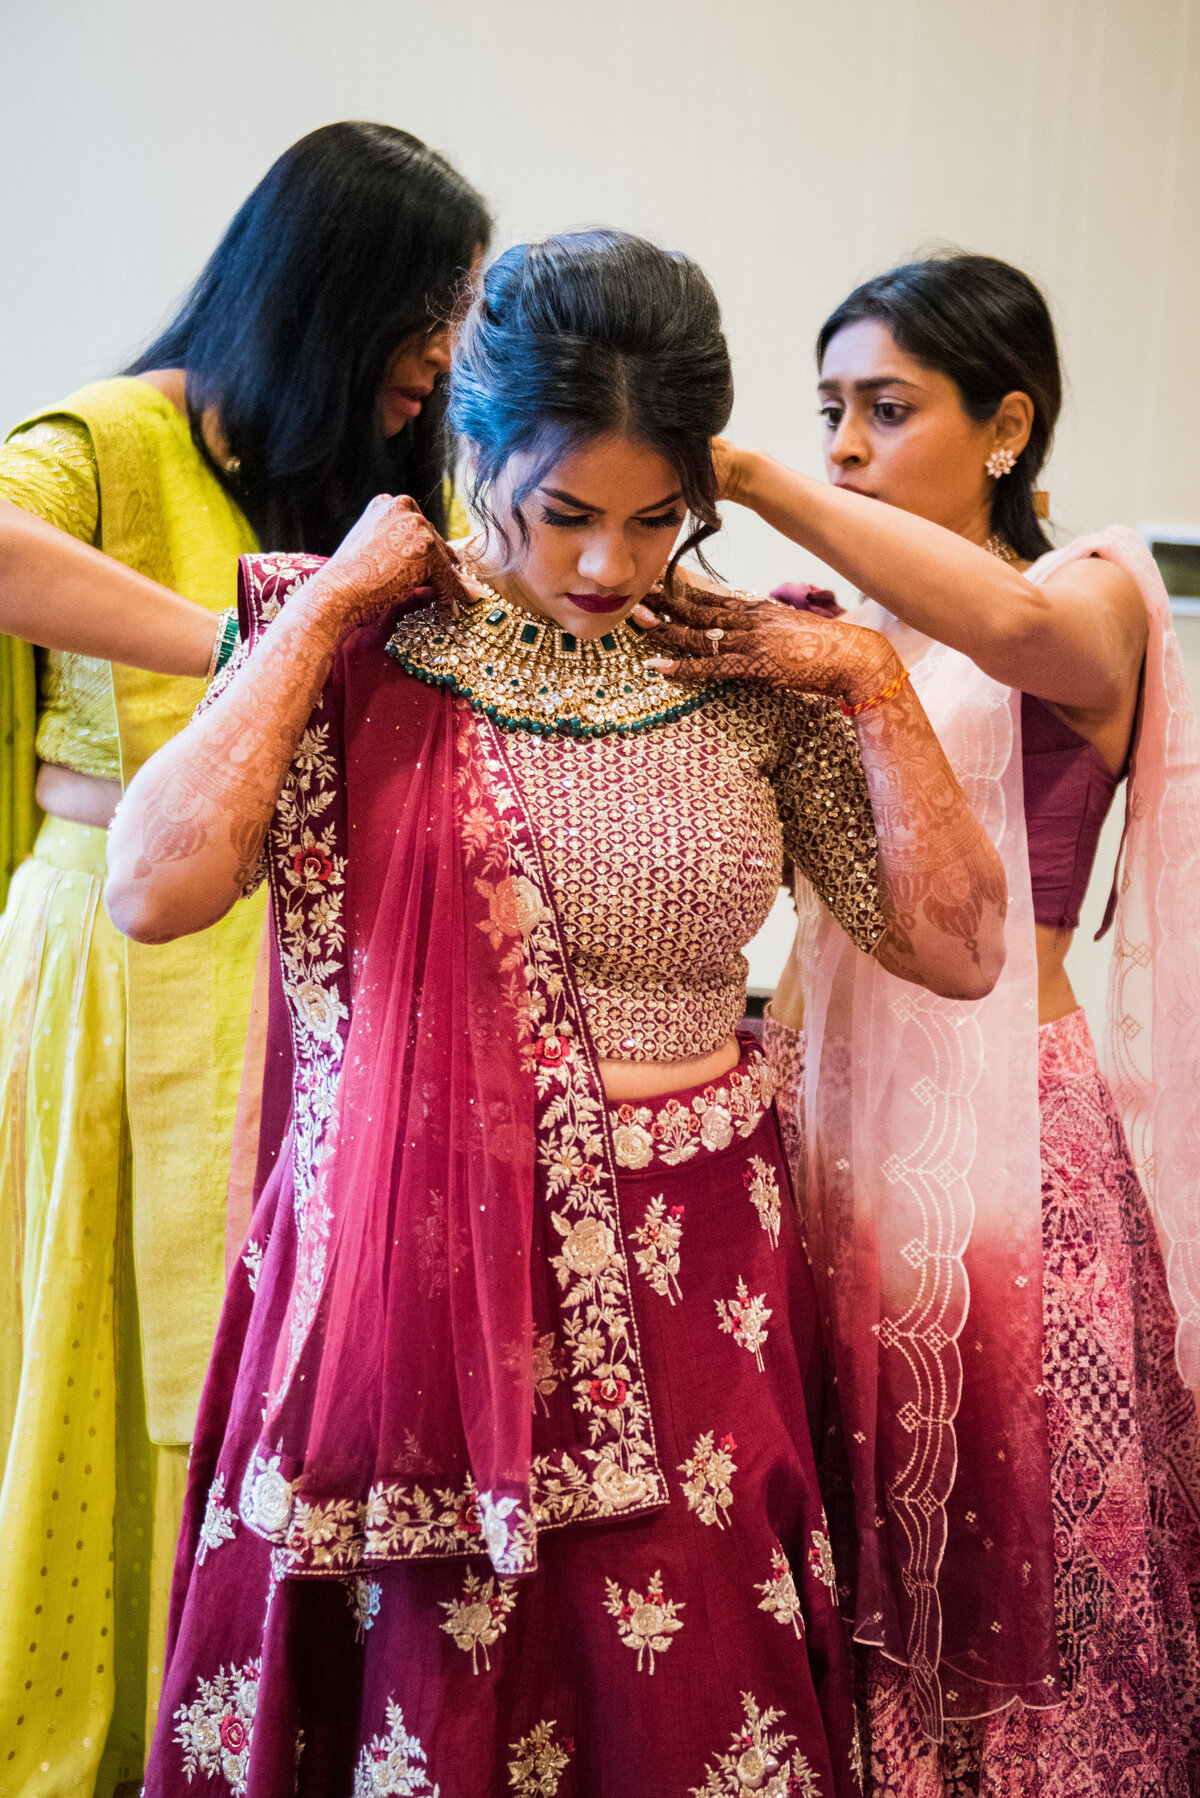 An Indian bride gets help from her bridesmaids as they put on the traditional ceremonial outfit.